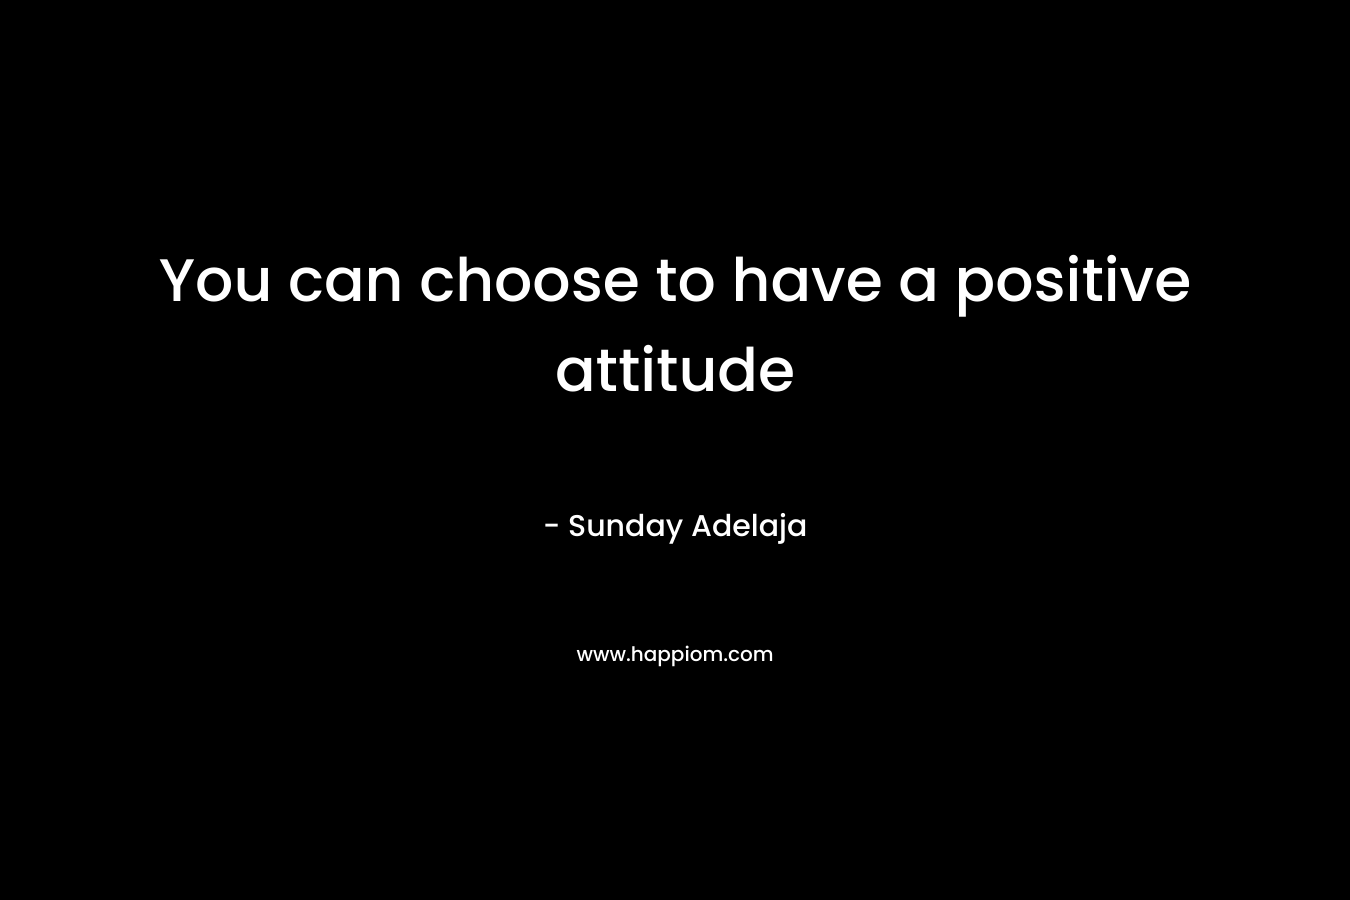 You can choose to have a positive attitude